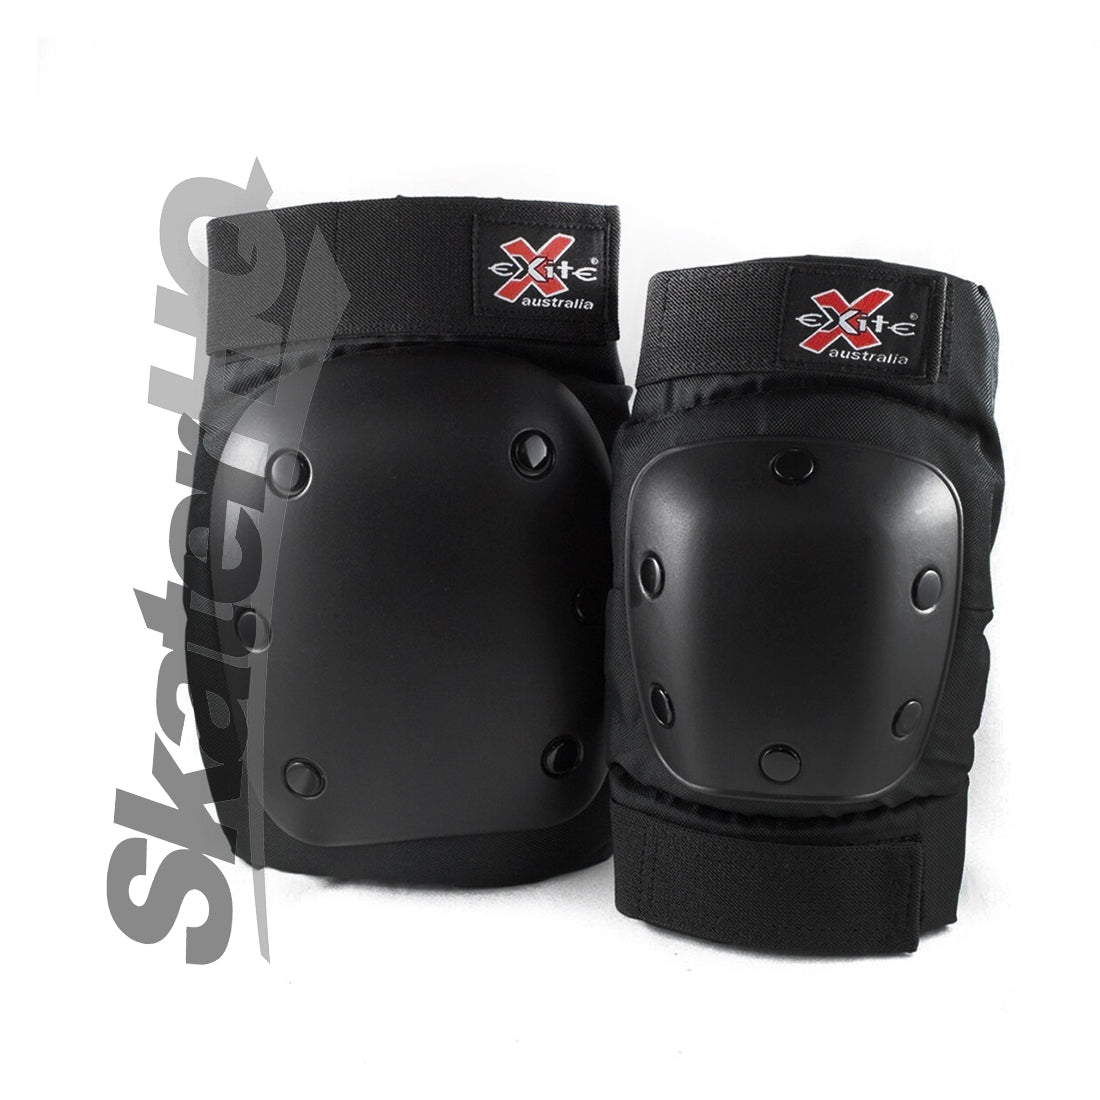 Exite Creatures 2-Pack - Black - Adult Large Protective Gear